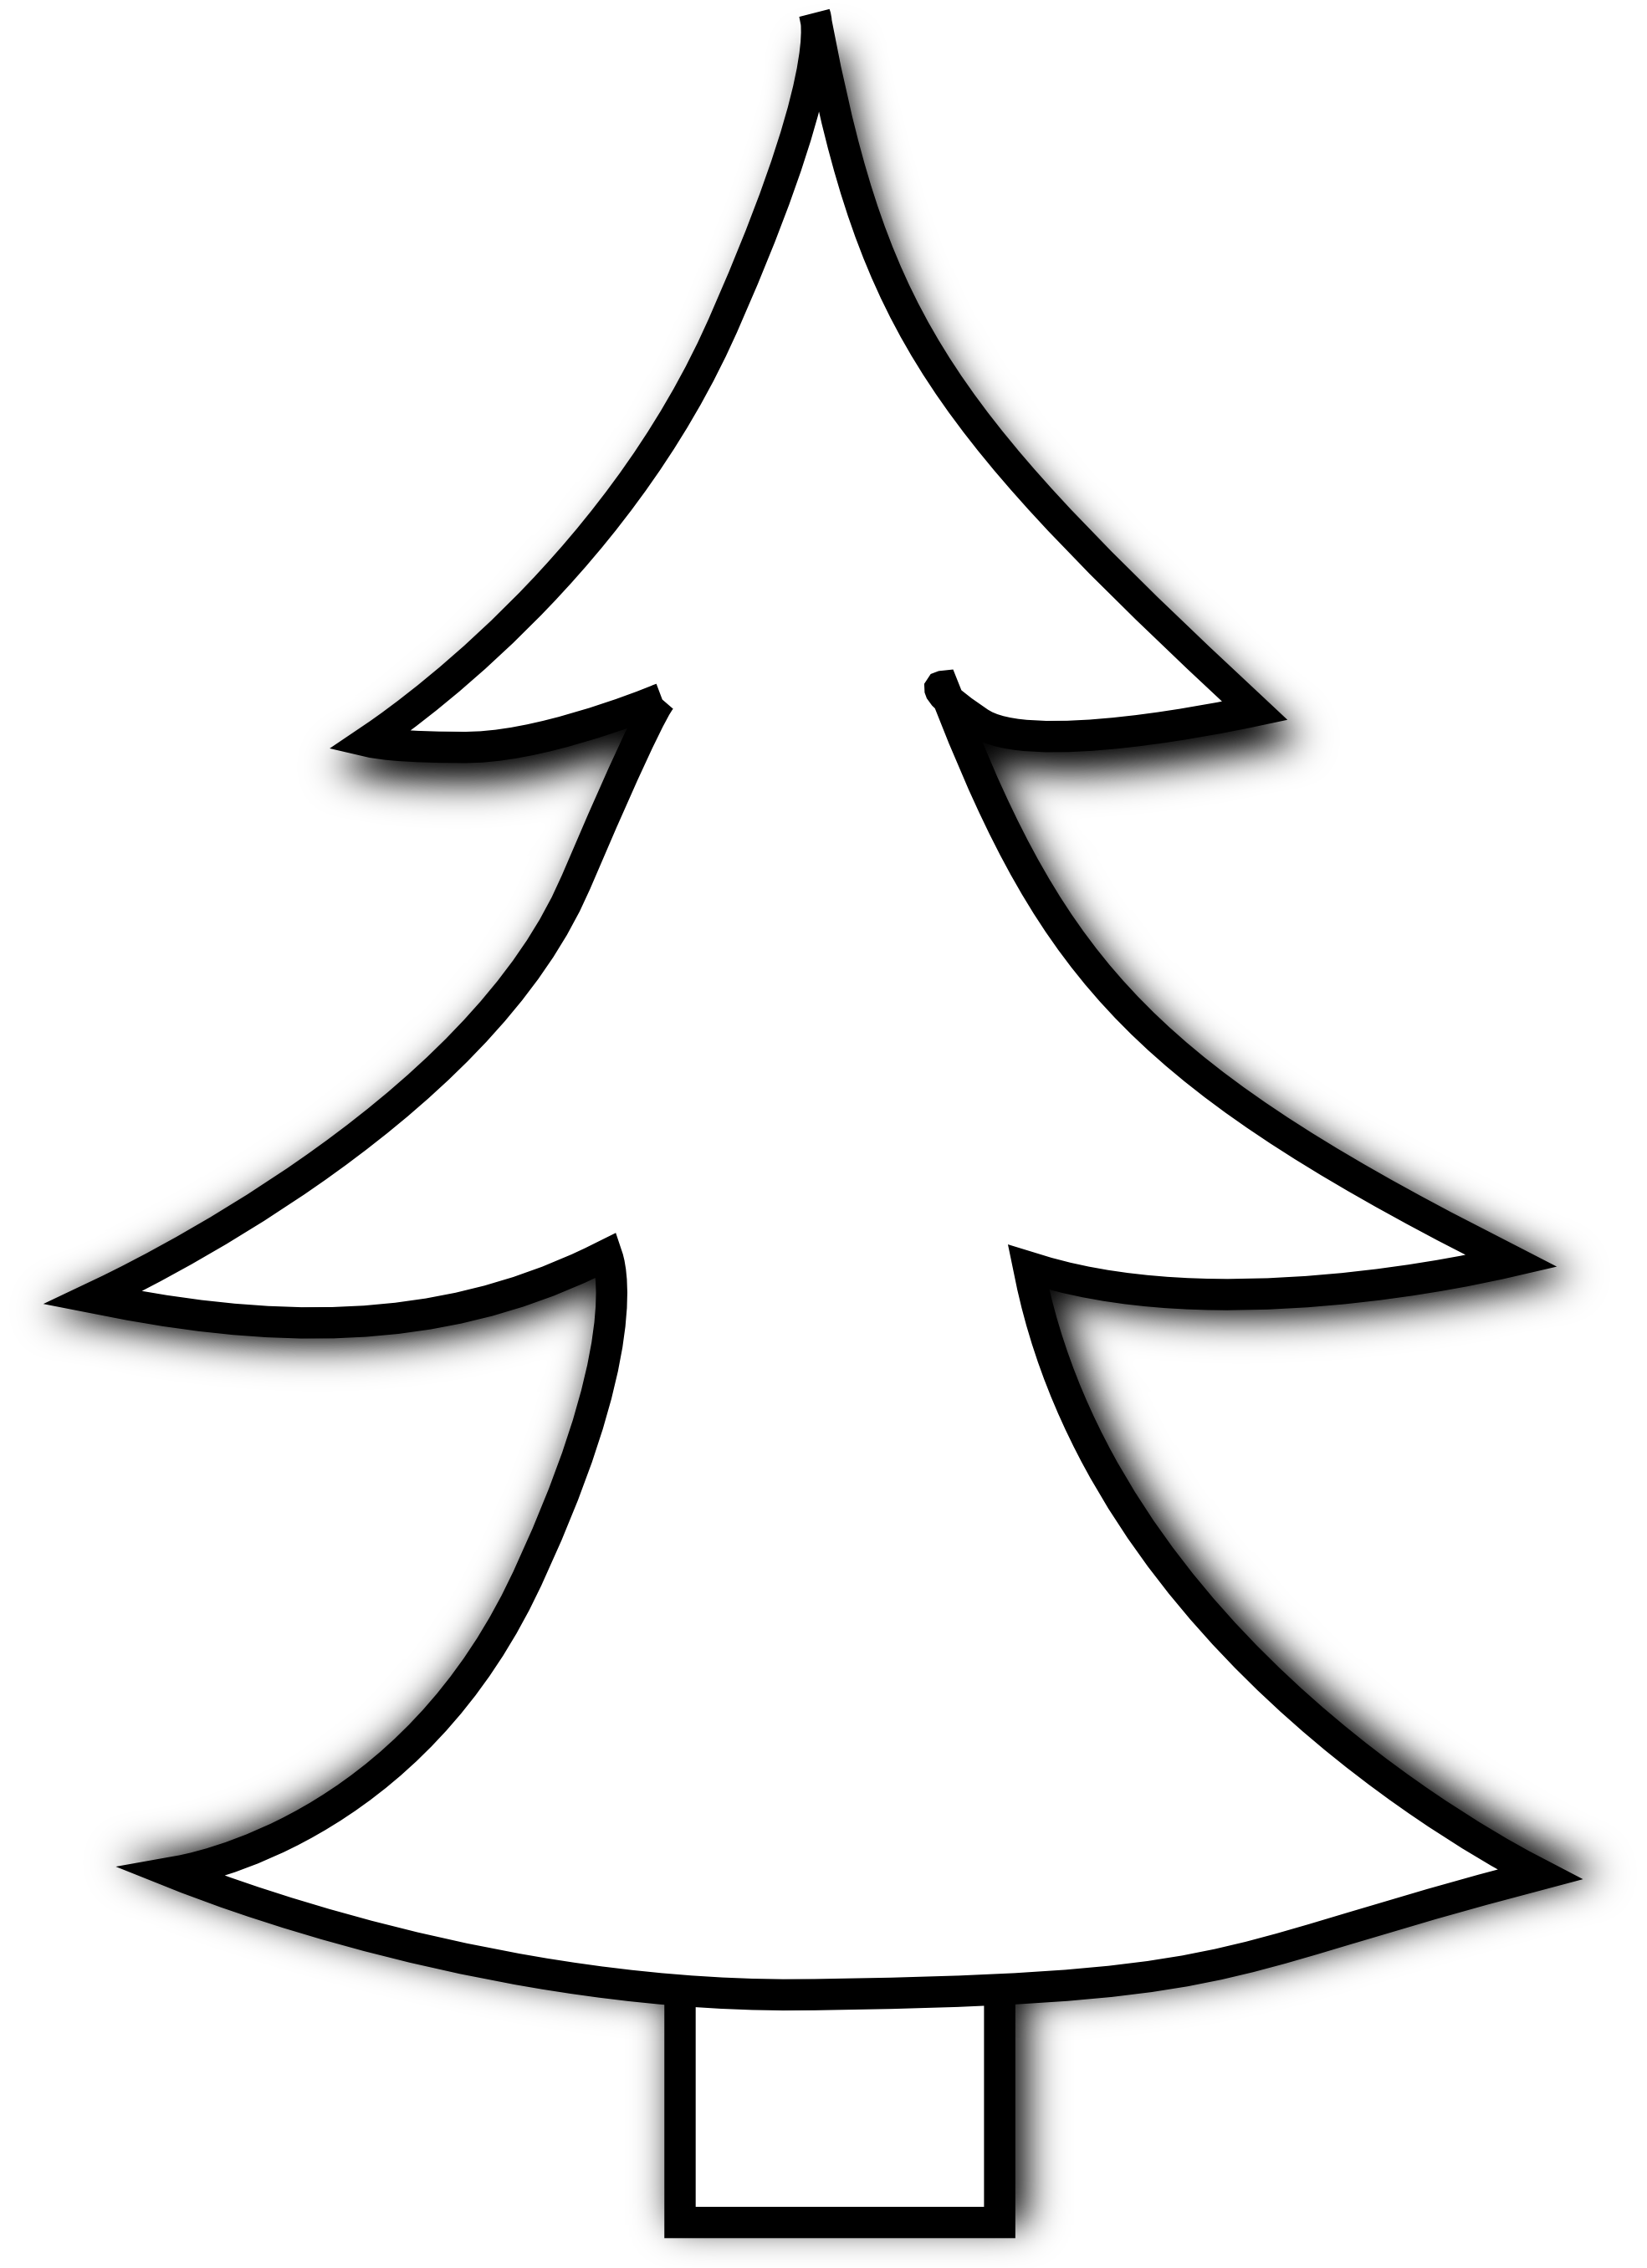 office cleaning clipart black and white tree